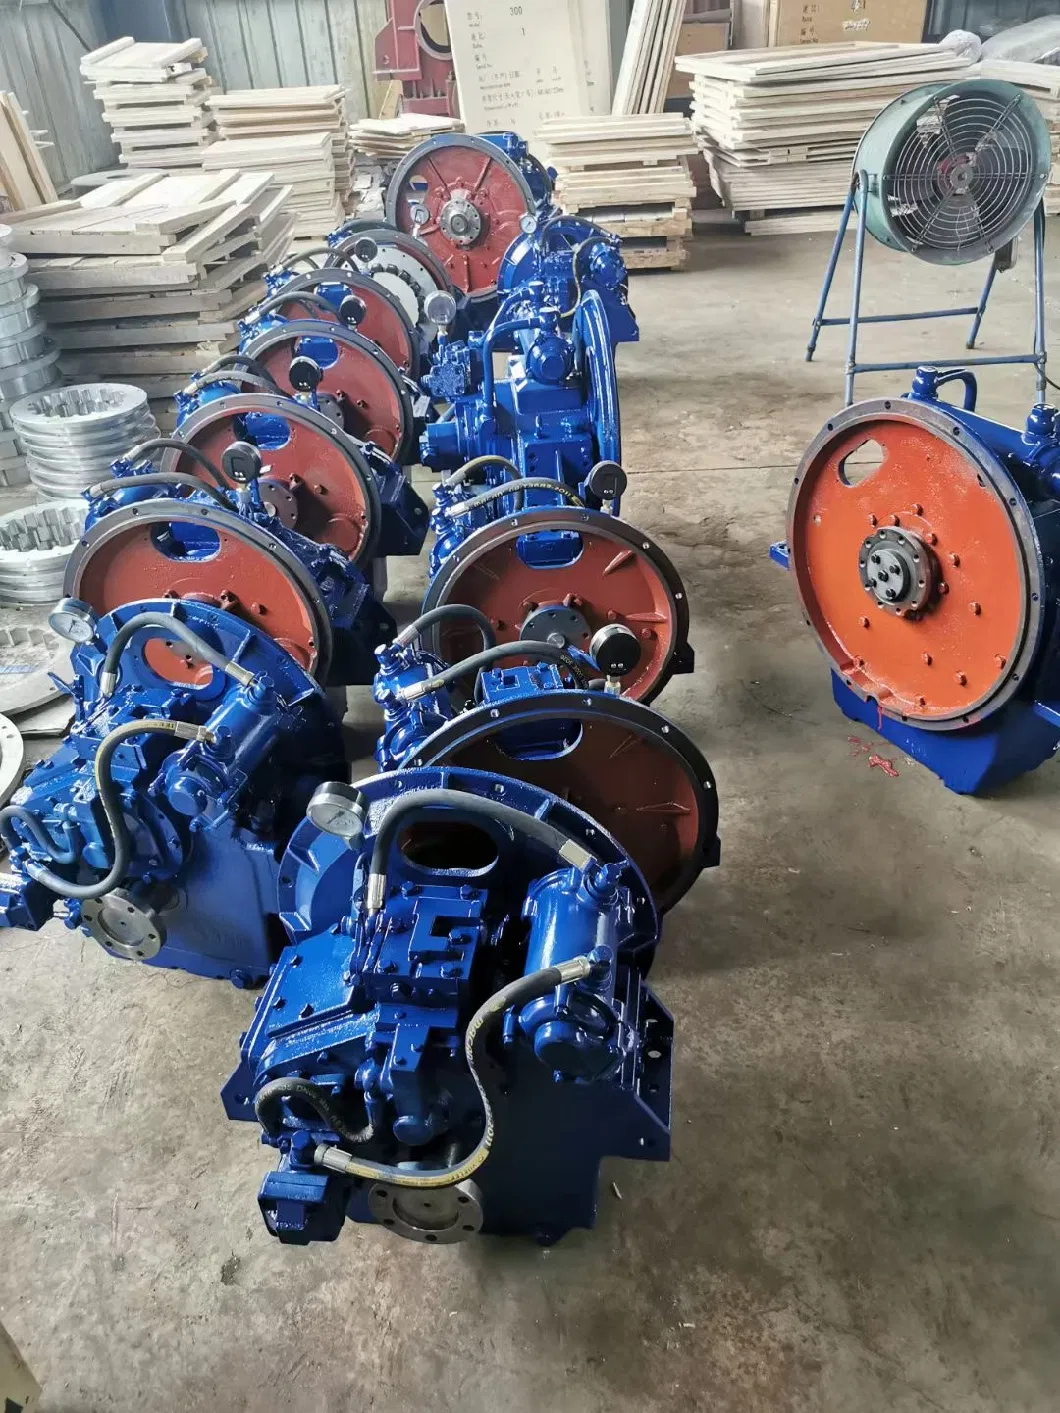 Advance 120c Gearbox About China Famous Brand Products Weichai Engine